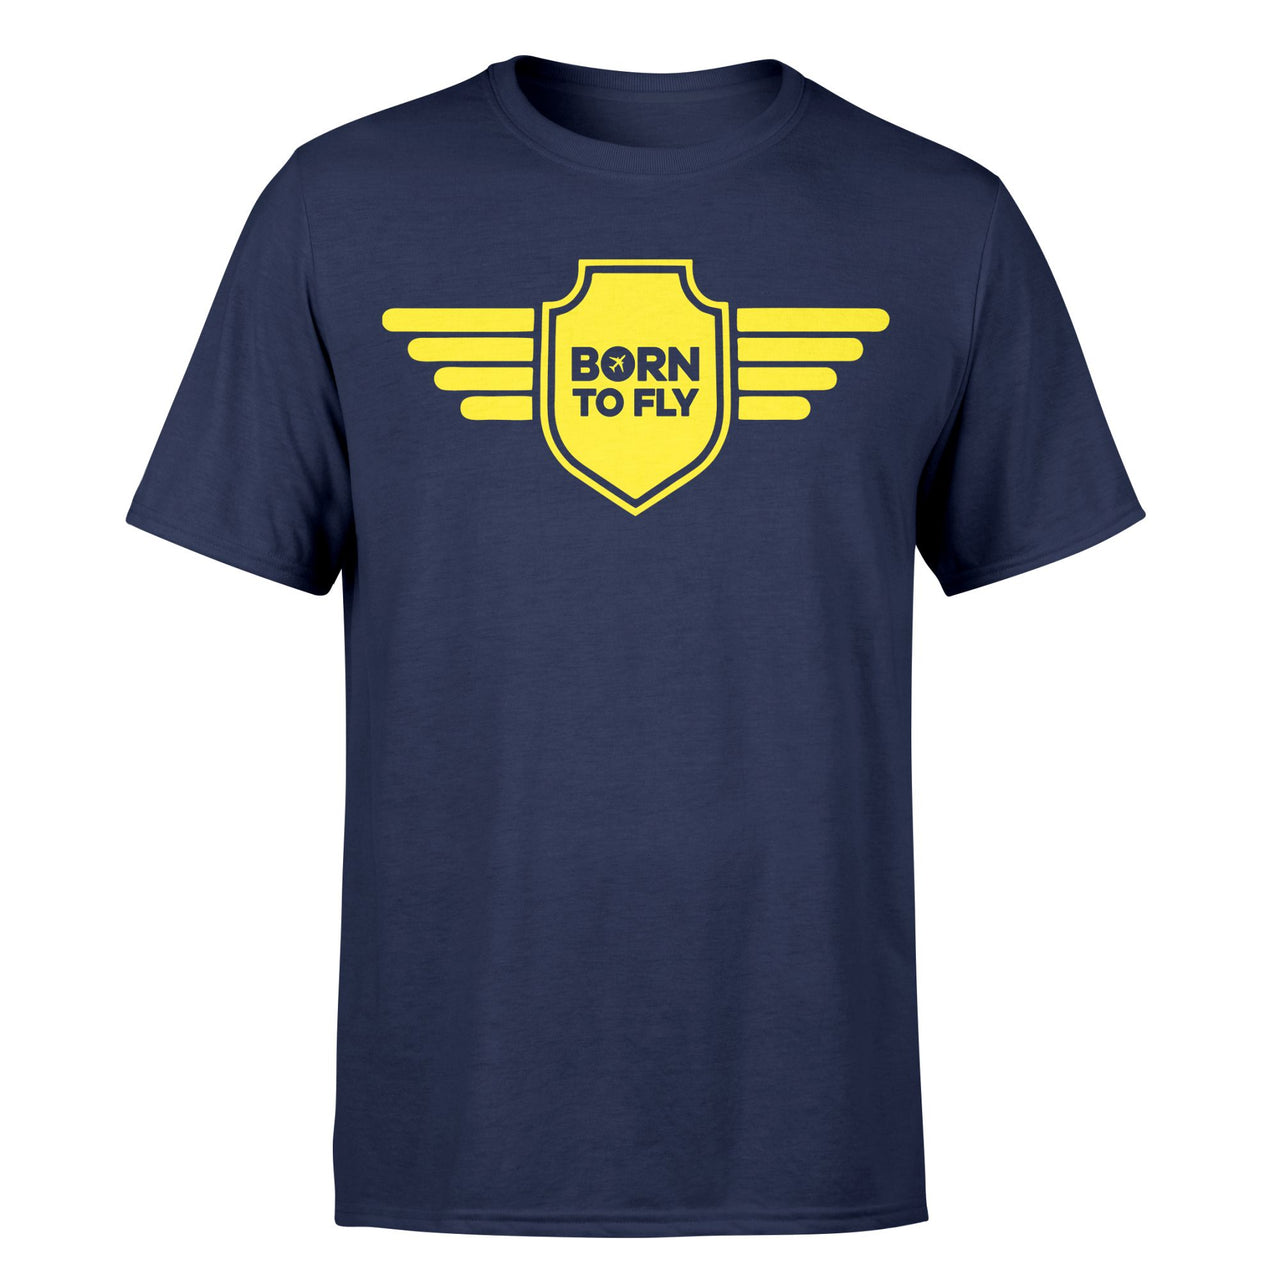 Born To Fly & Badge Designed T-Shirts